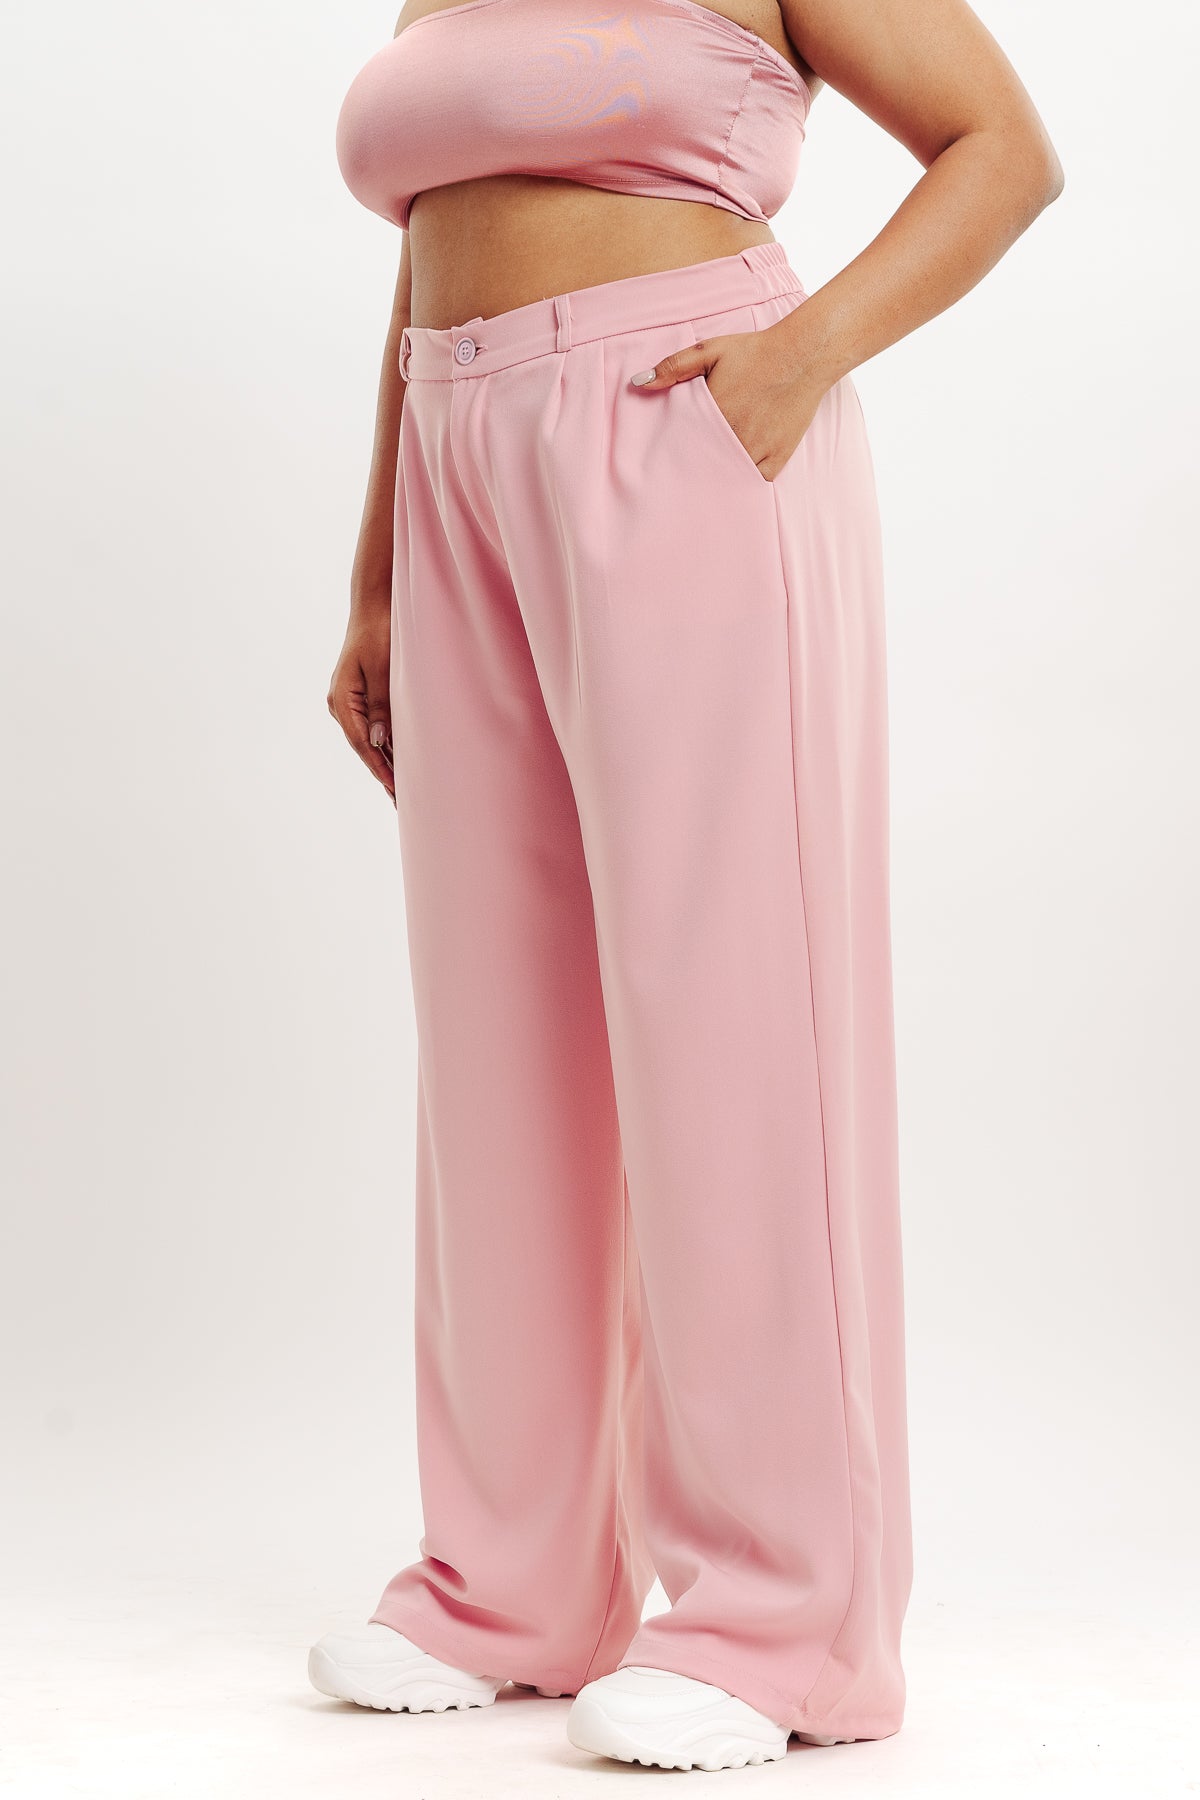 Pink Trousers - Hot Pink & Baby Pink Trousers | SilkFred